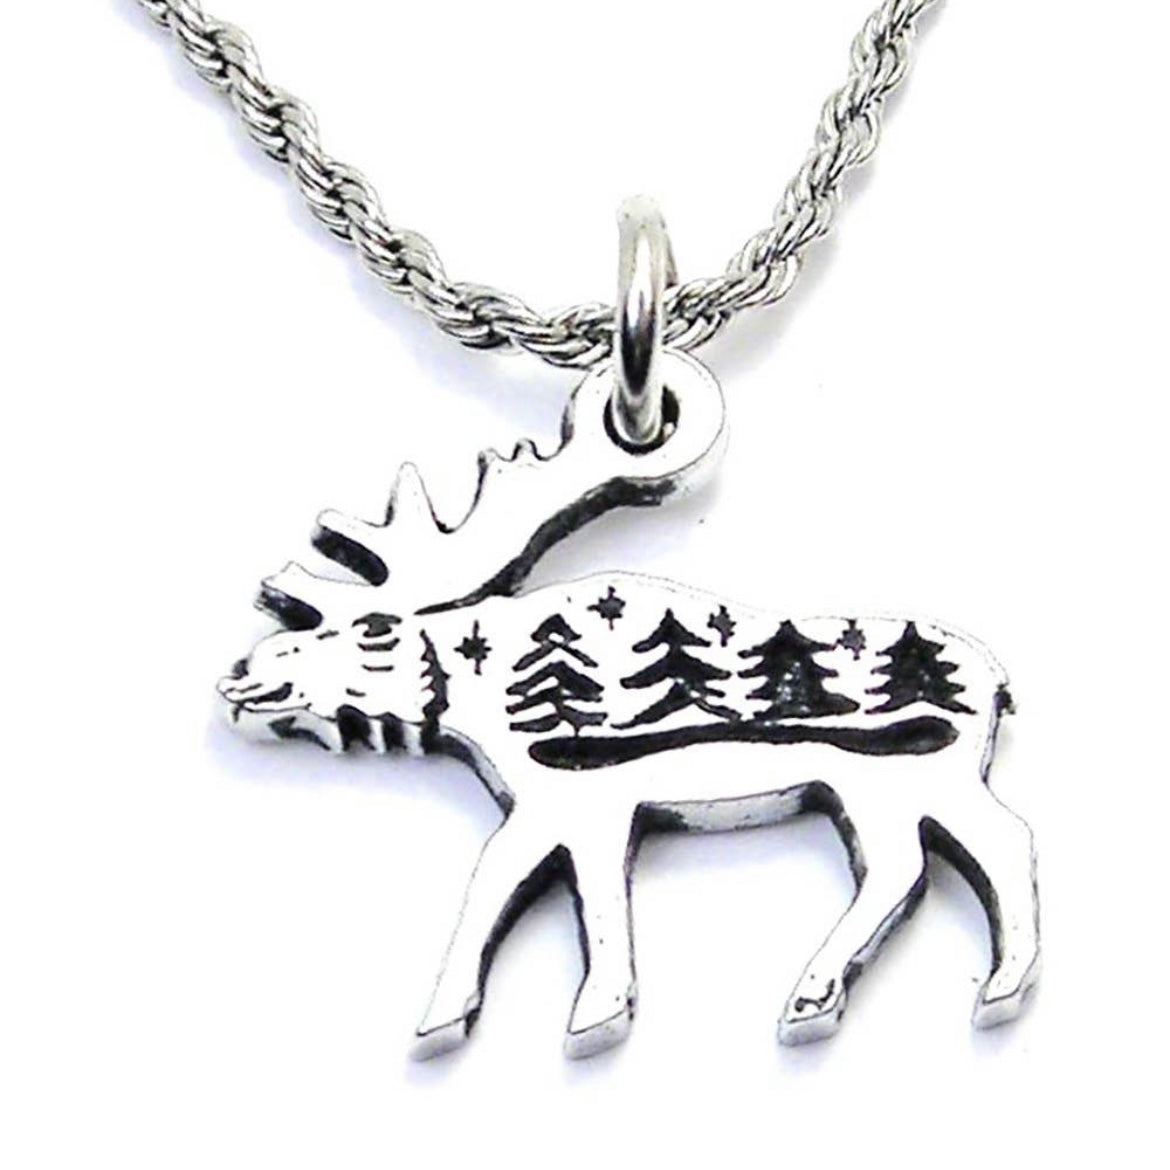 Moose Scenery Charm Necklace